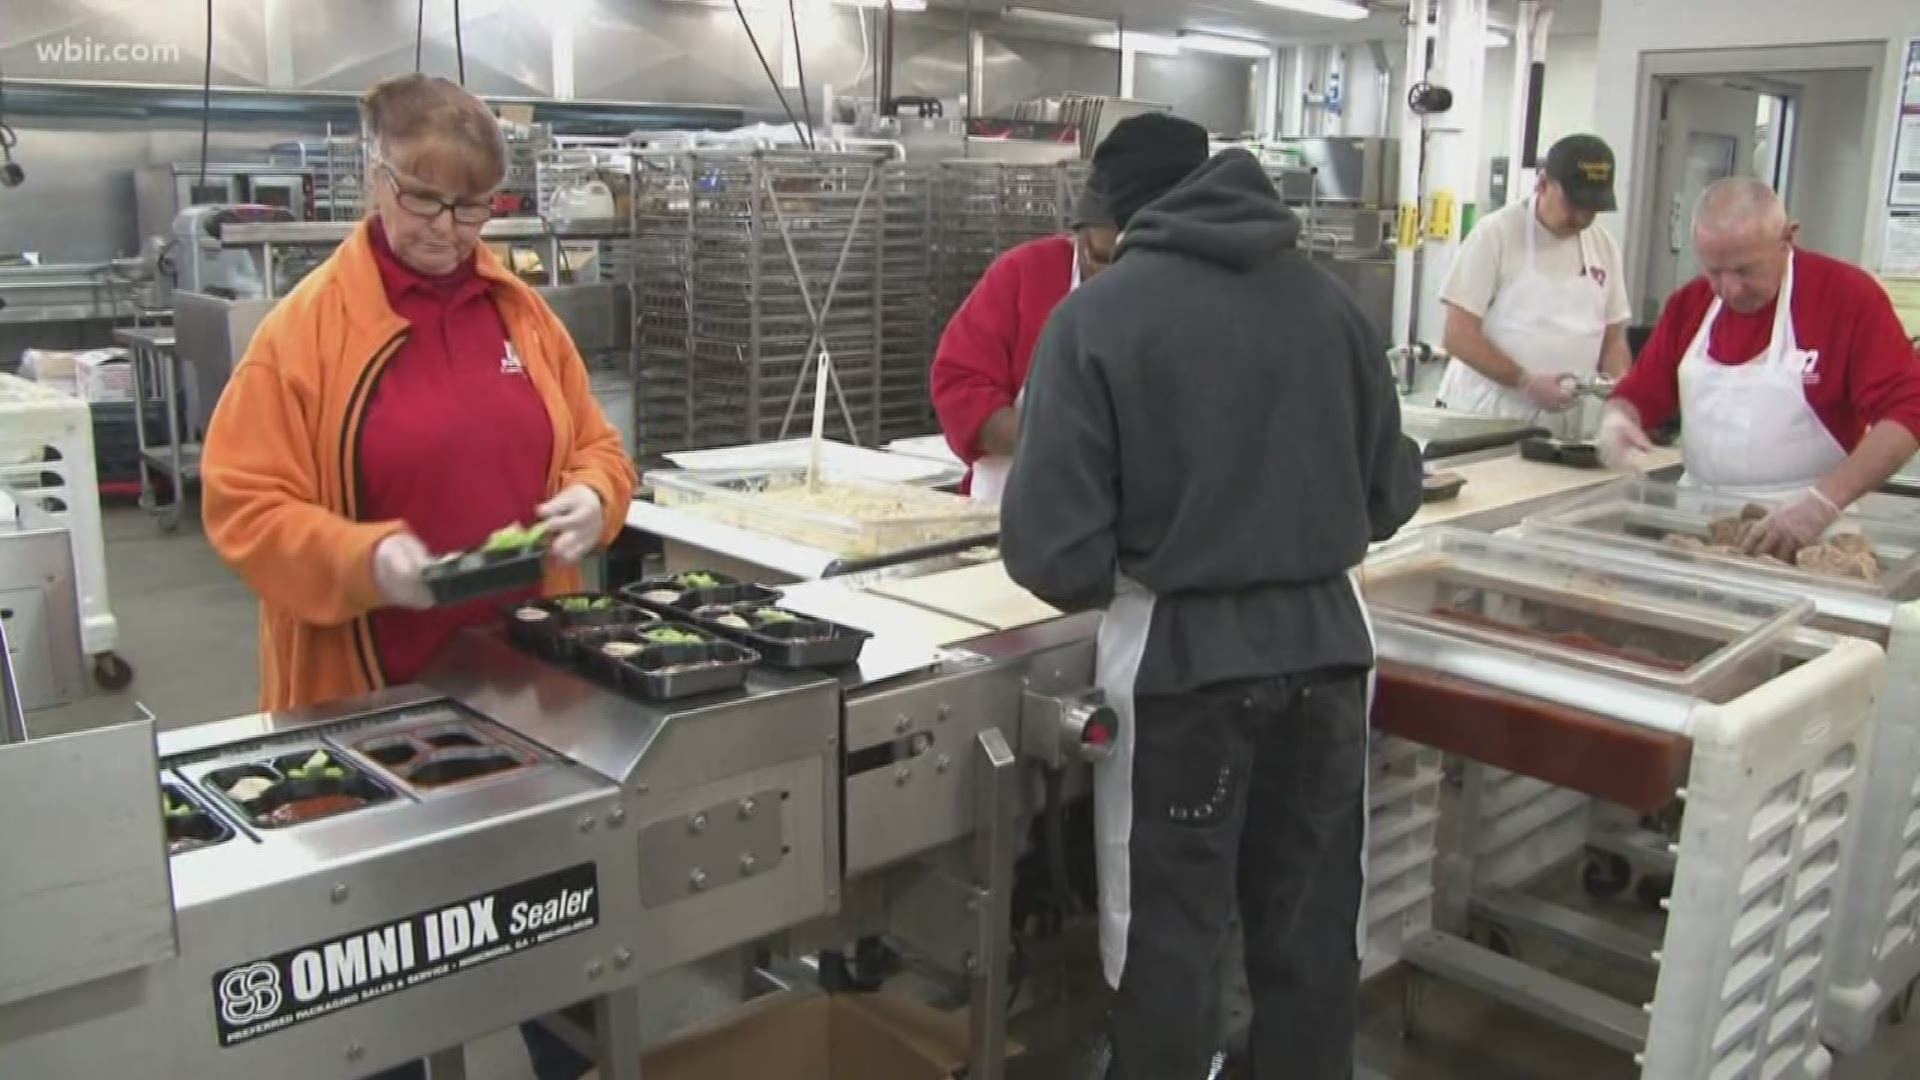 For many East Tennessee families, the need for food can increase during the holidays.